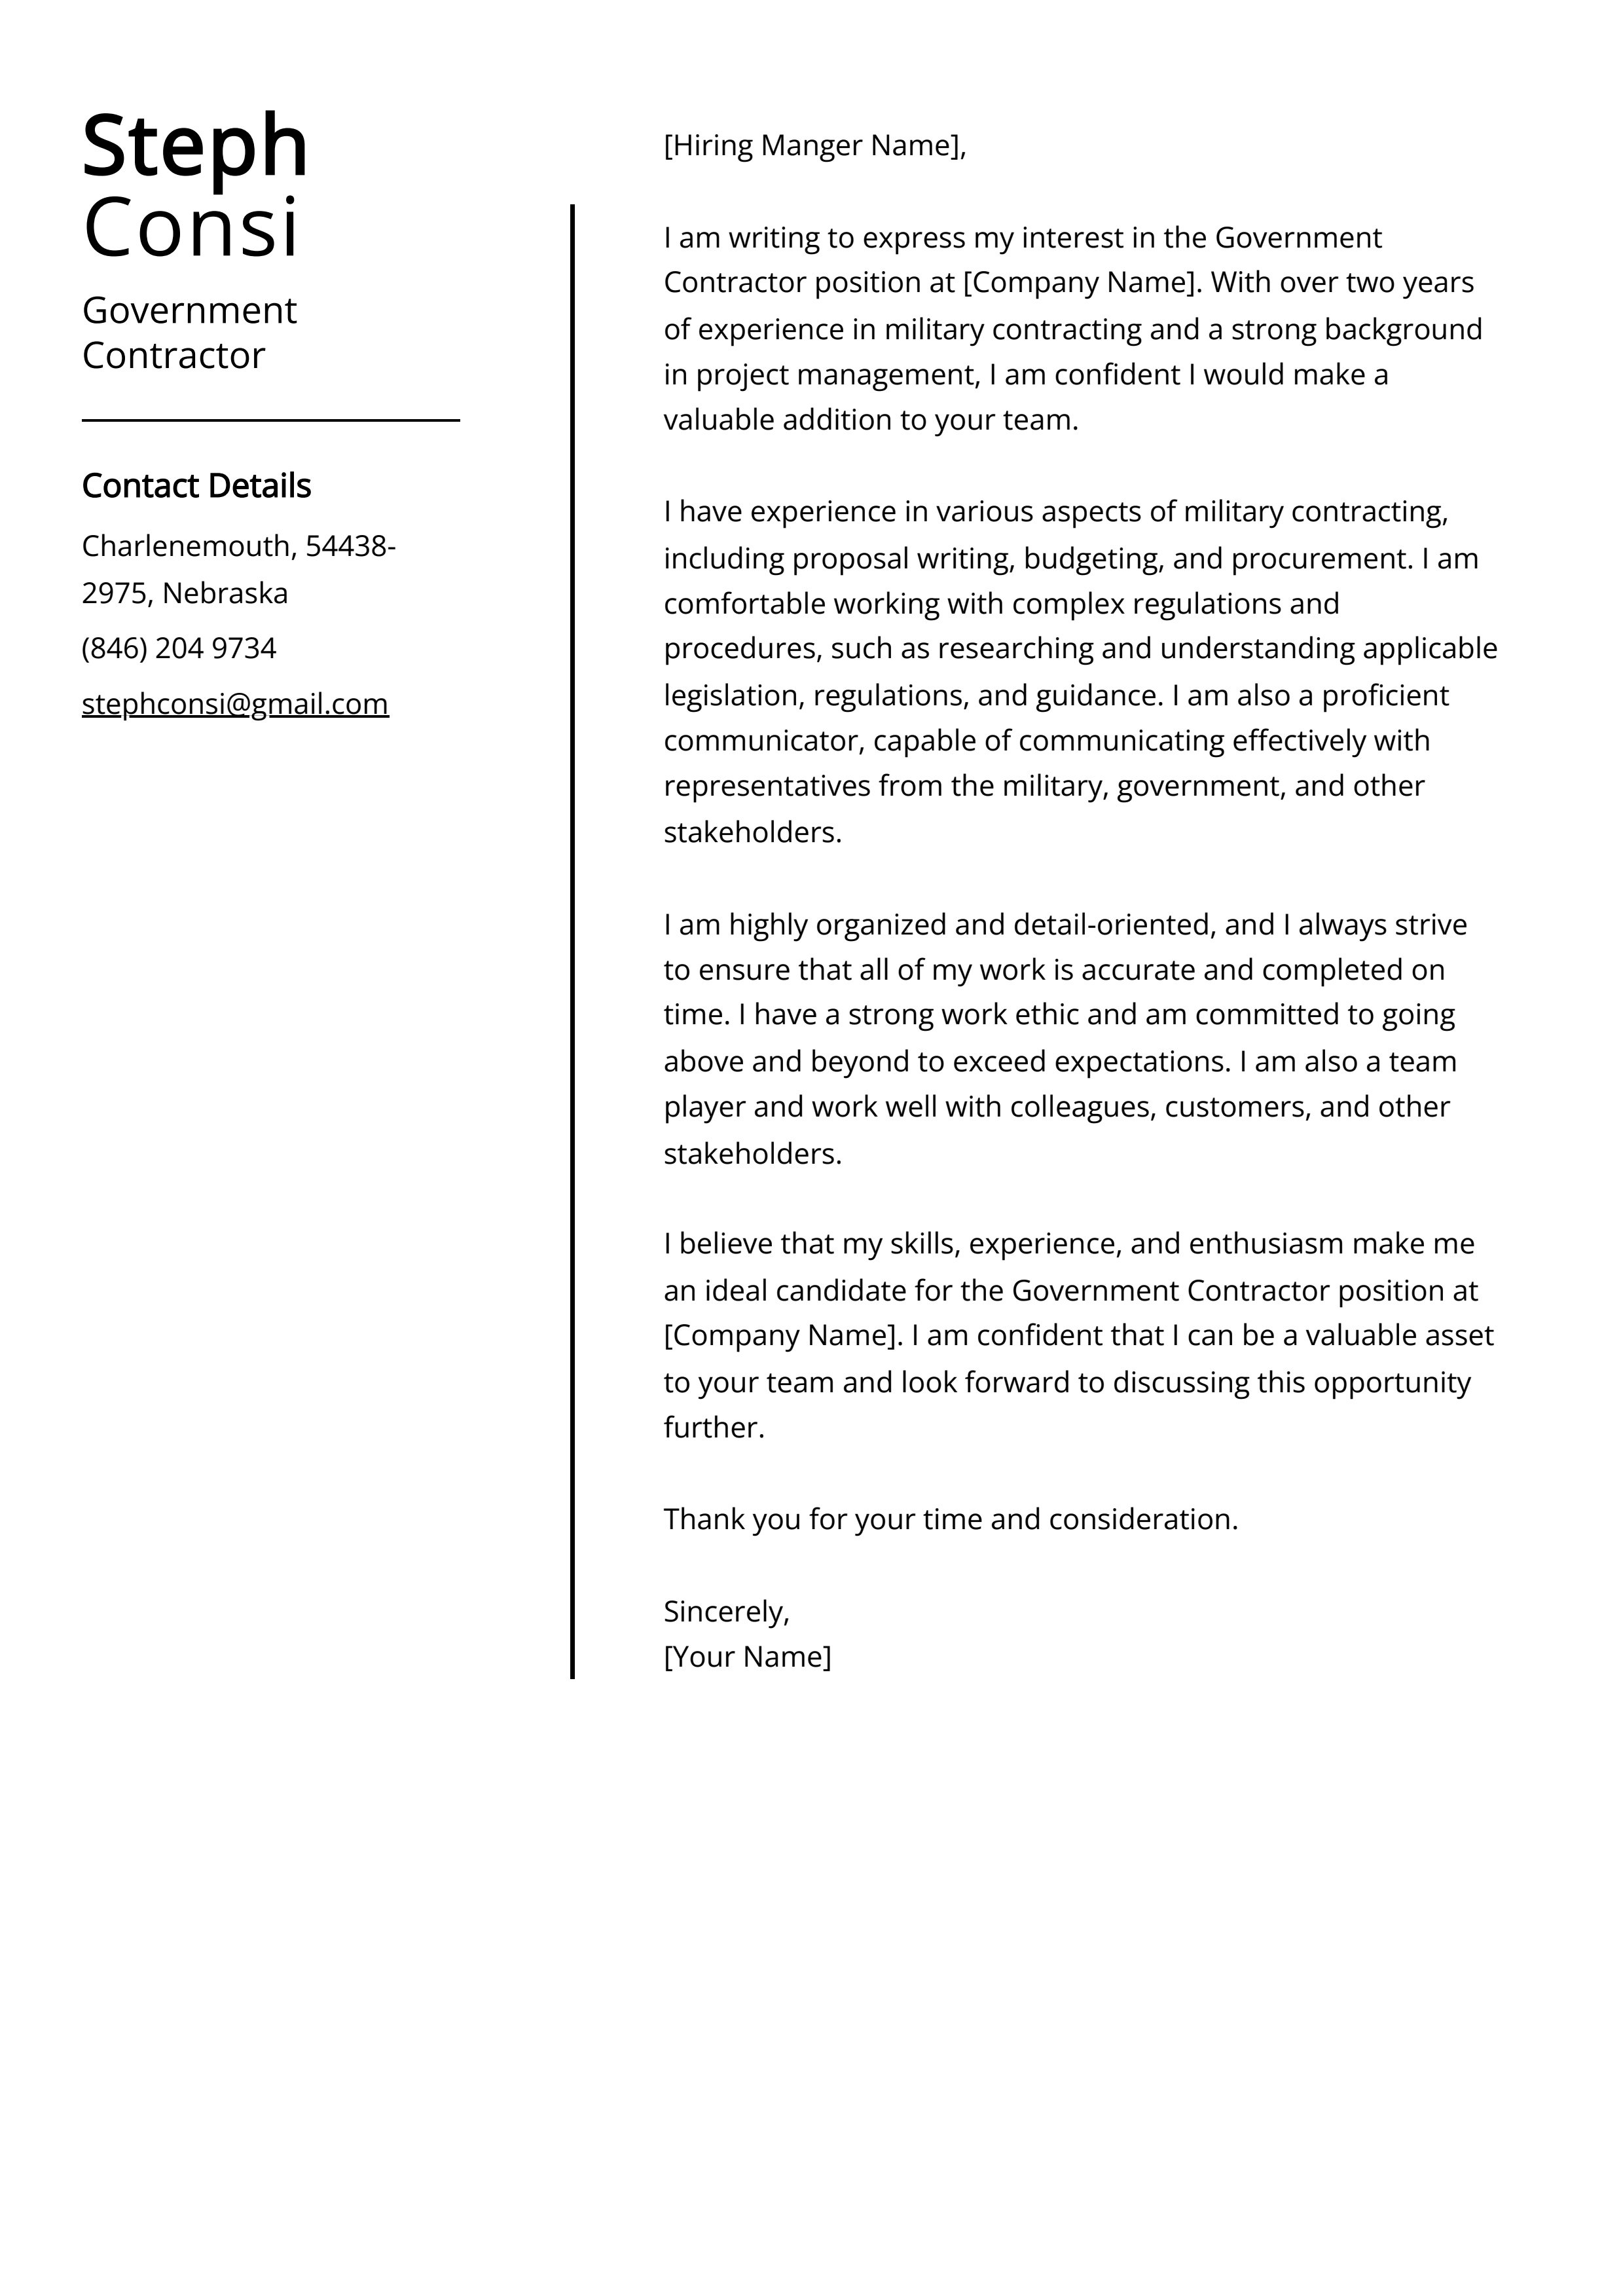 Government Contractor Cover Letter Example